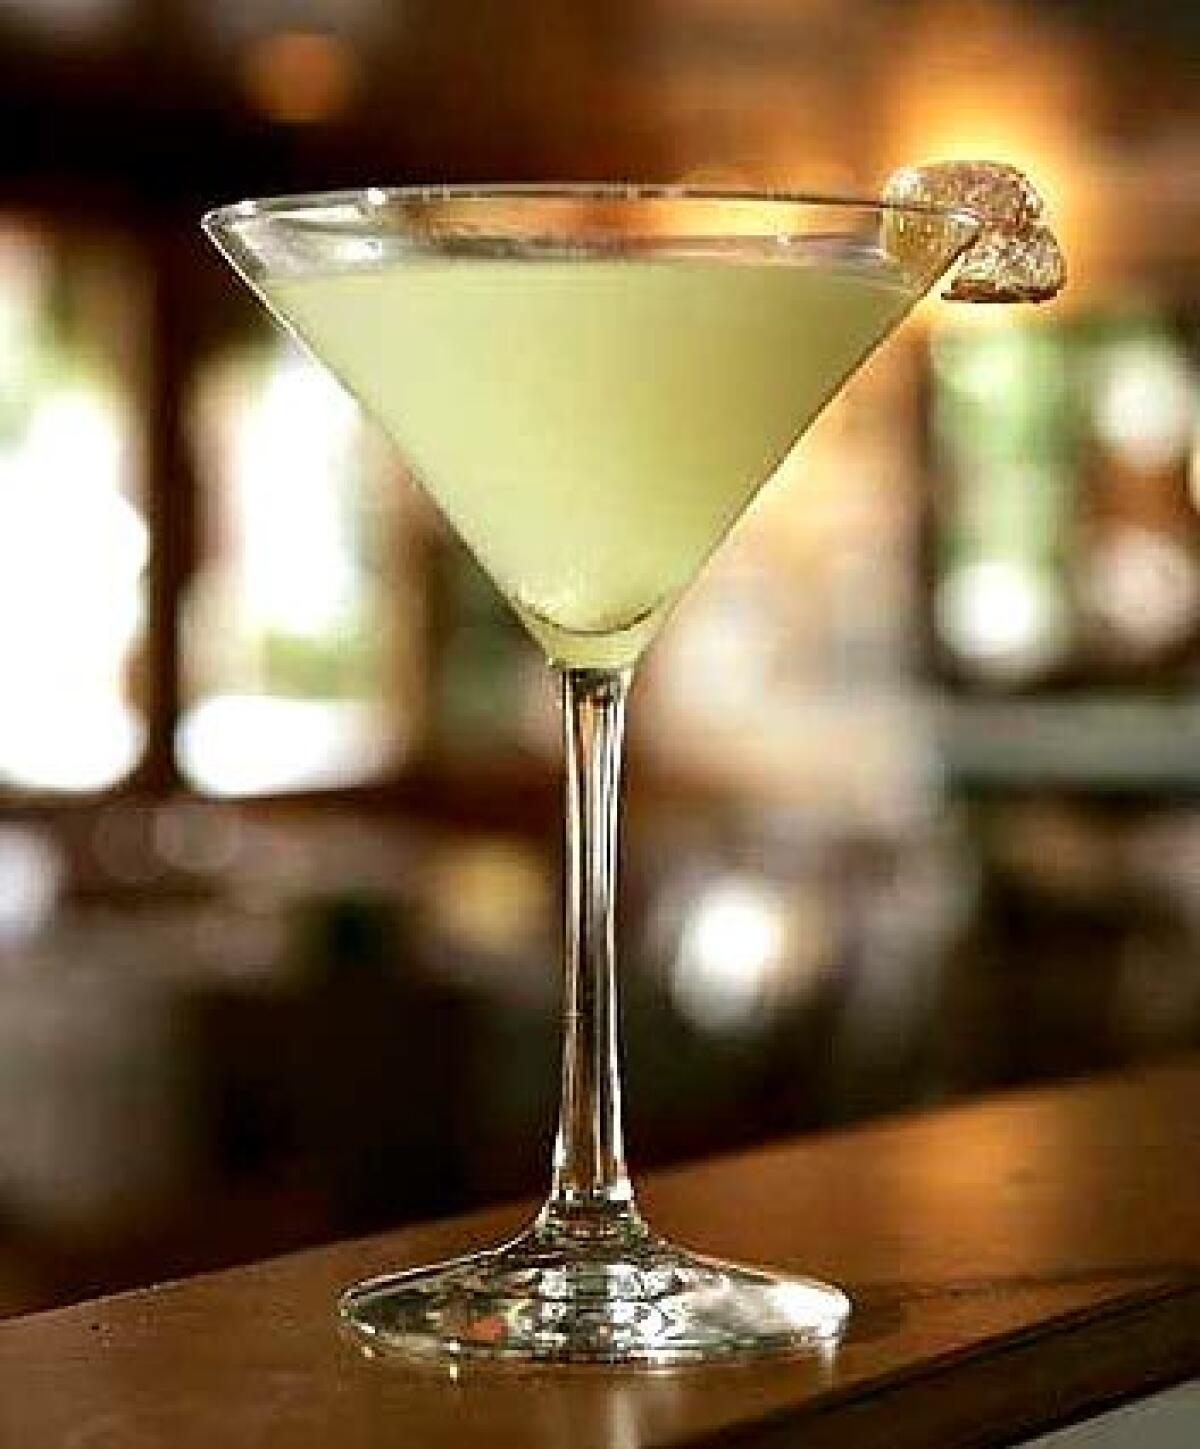 The gingertini at Literati II is made with ginger-muddled vodka, lemon juice and freshly pressed apple juice.